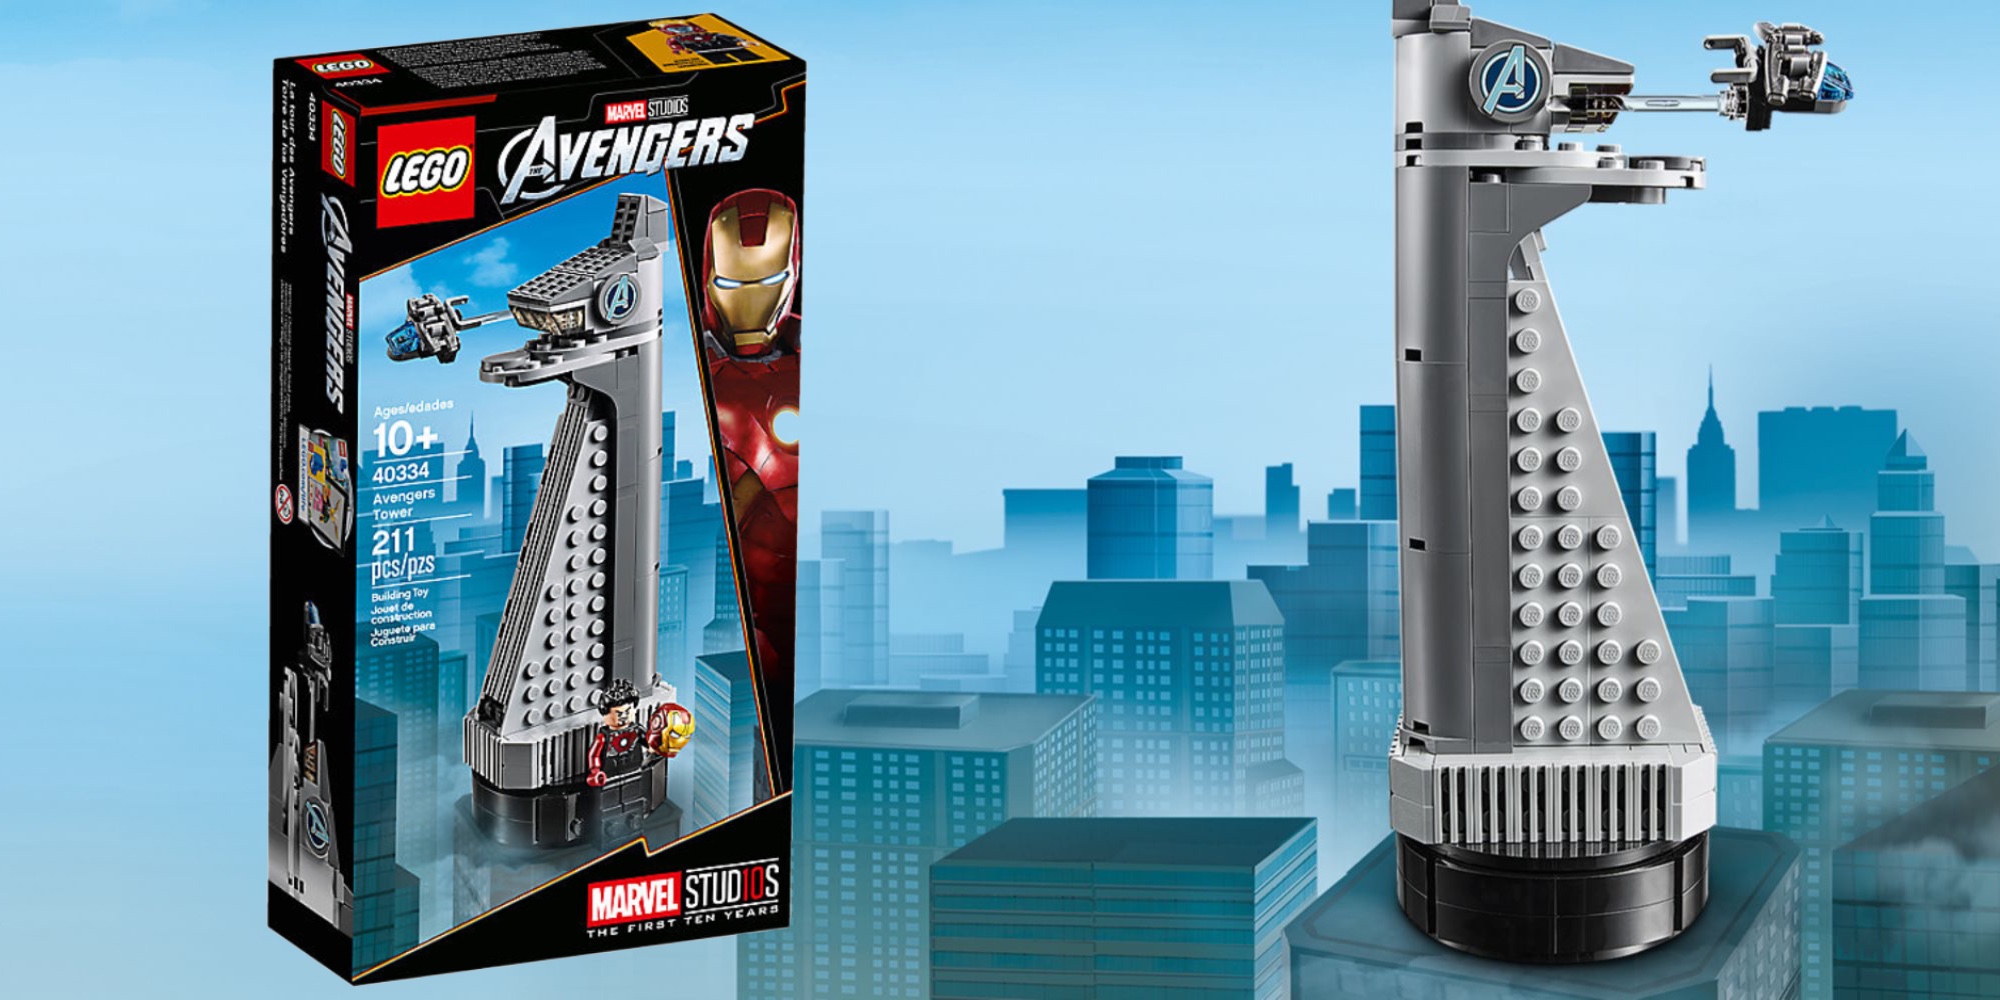 LEGO Avengers Tower promo runs through May 2nd 9to5Toys